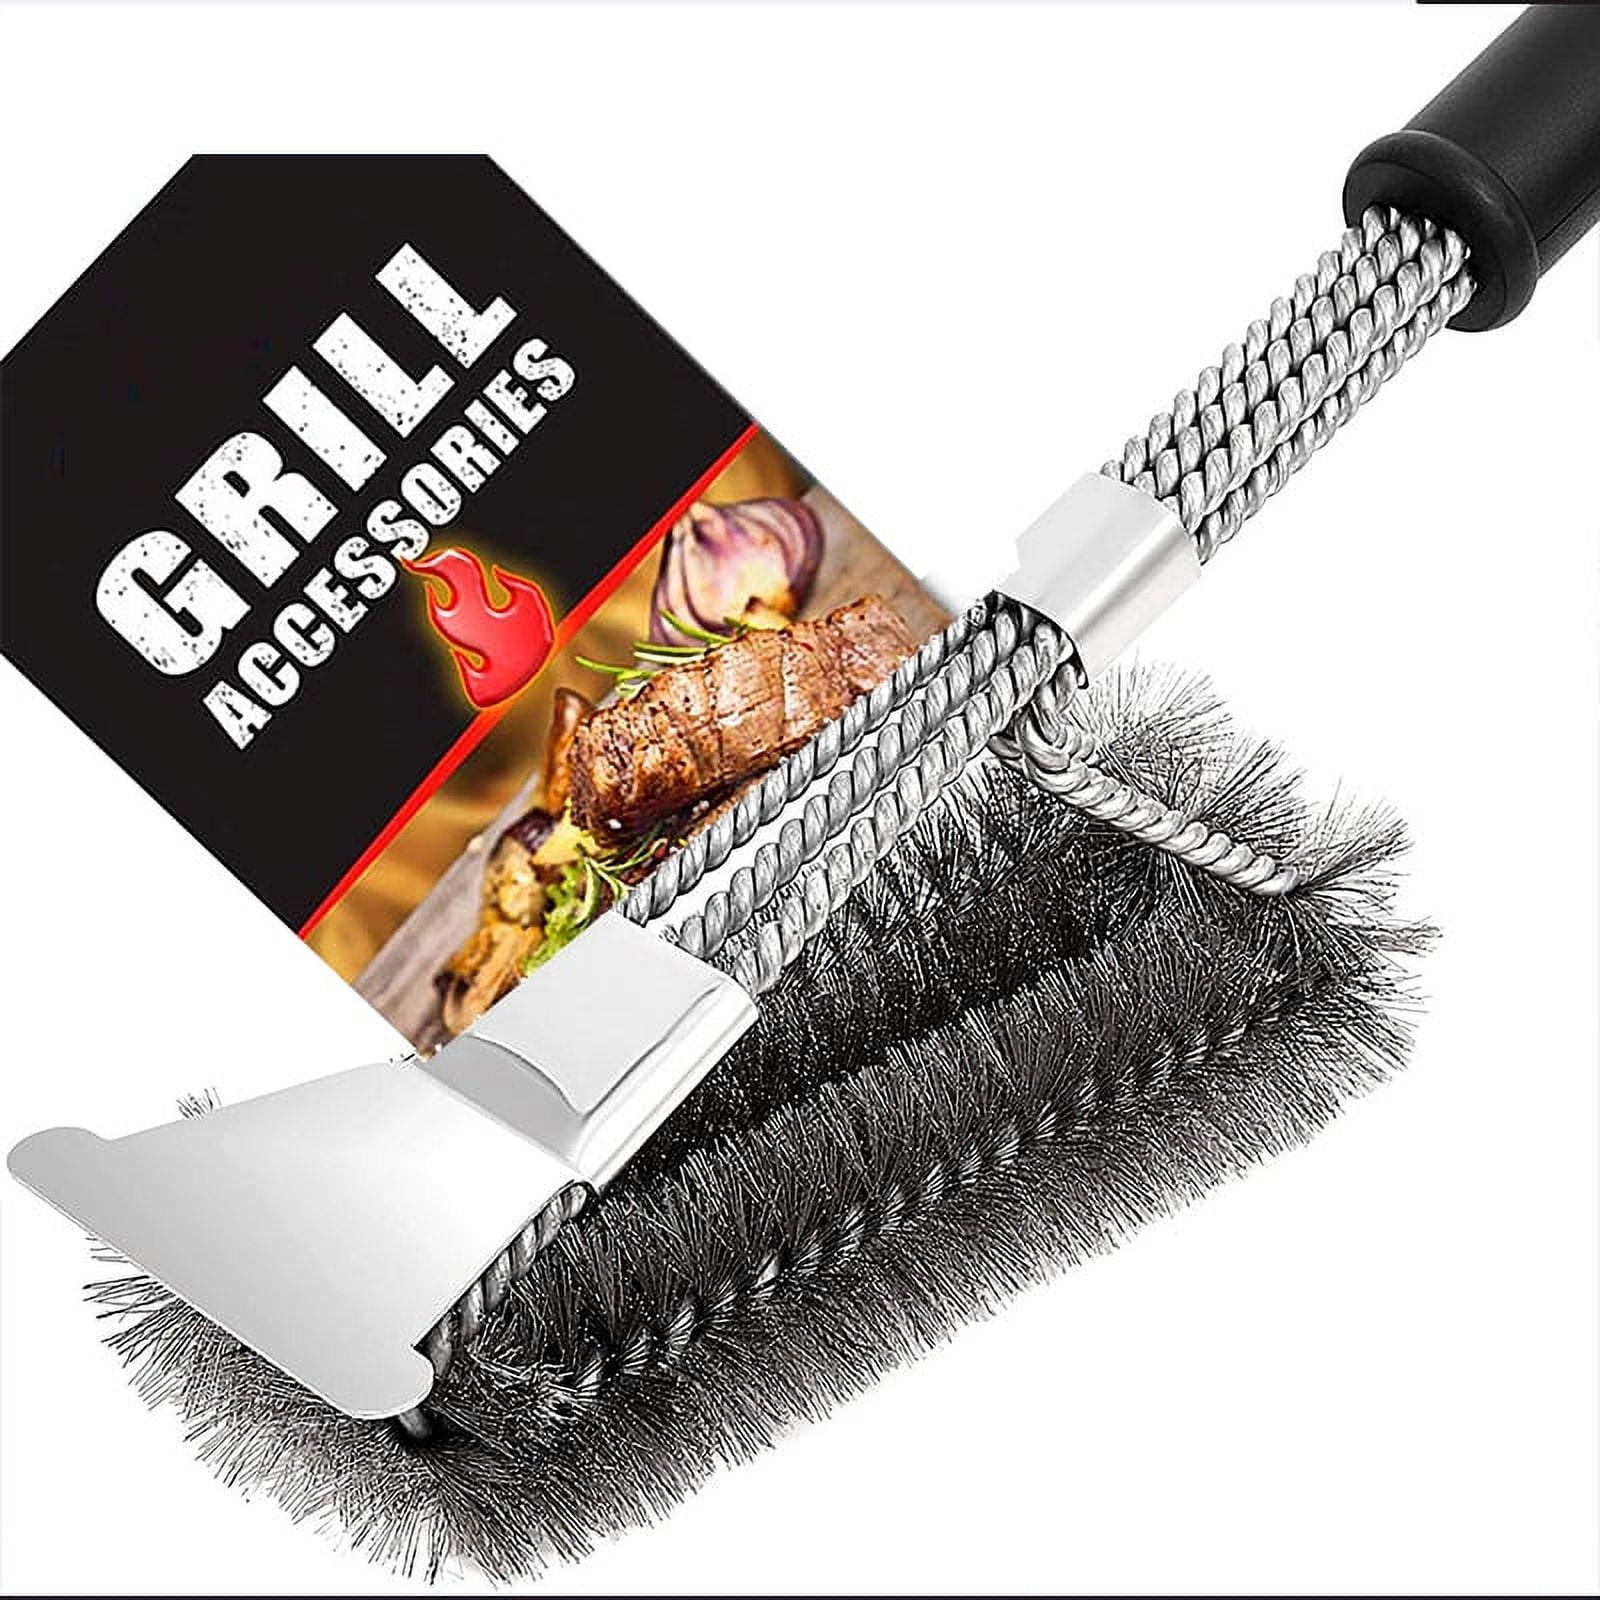 Grill Brush and Scraper, Extra Strong BBQ Cleaner Accessories, Safe Wi –  Academy of Q